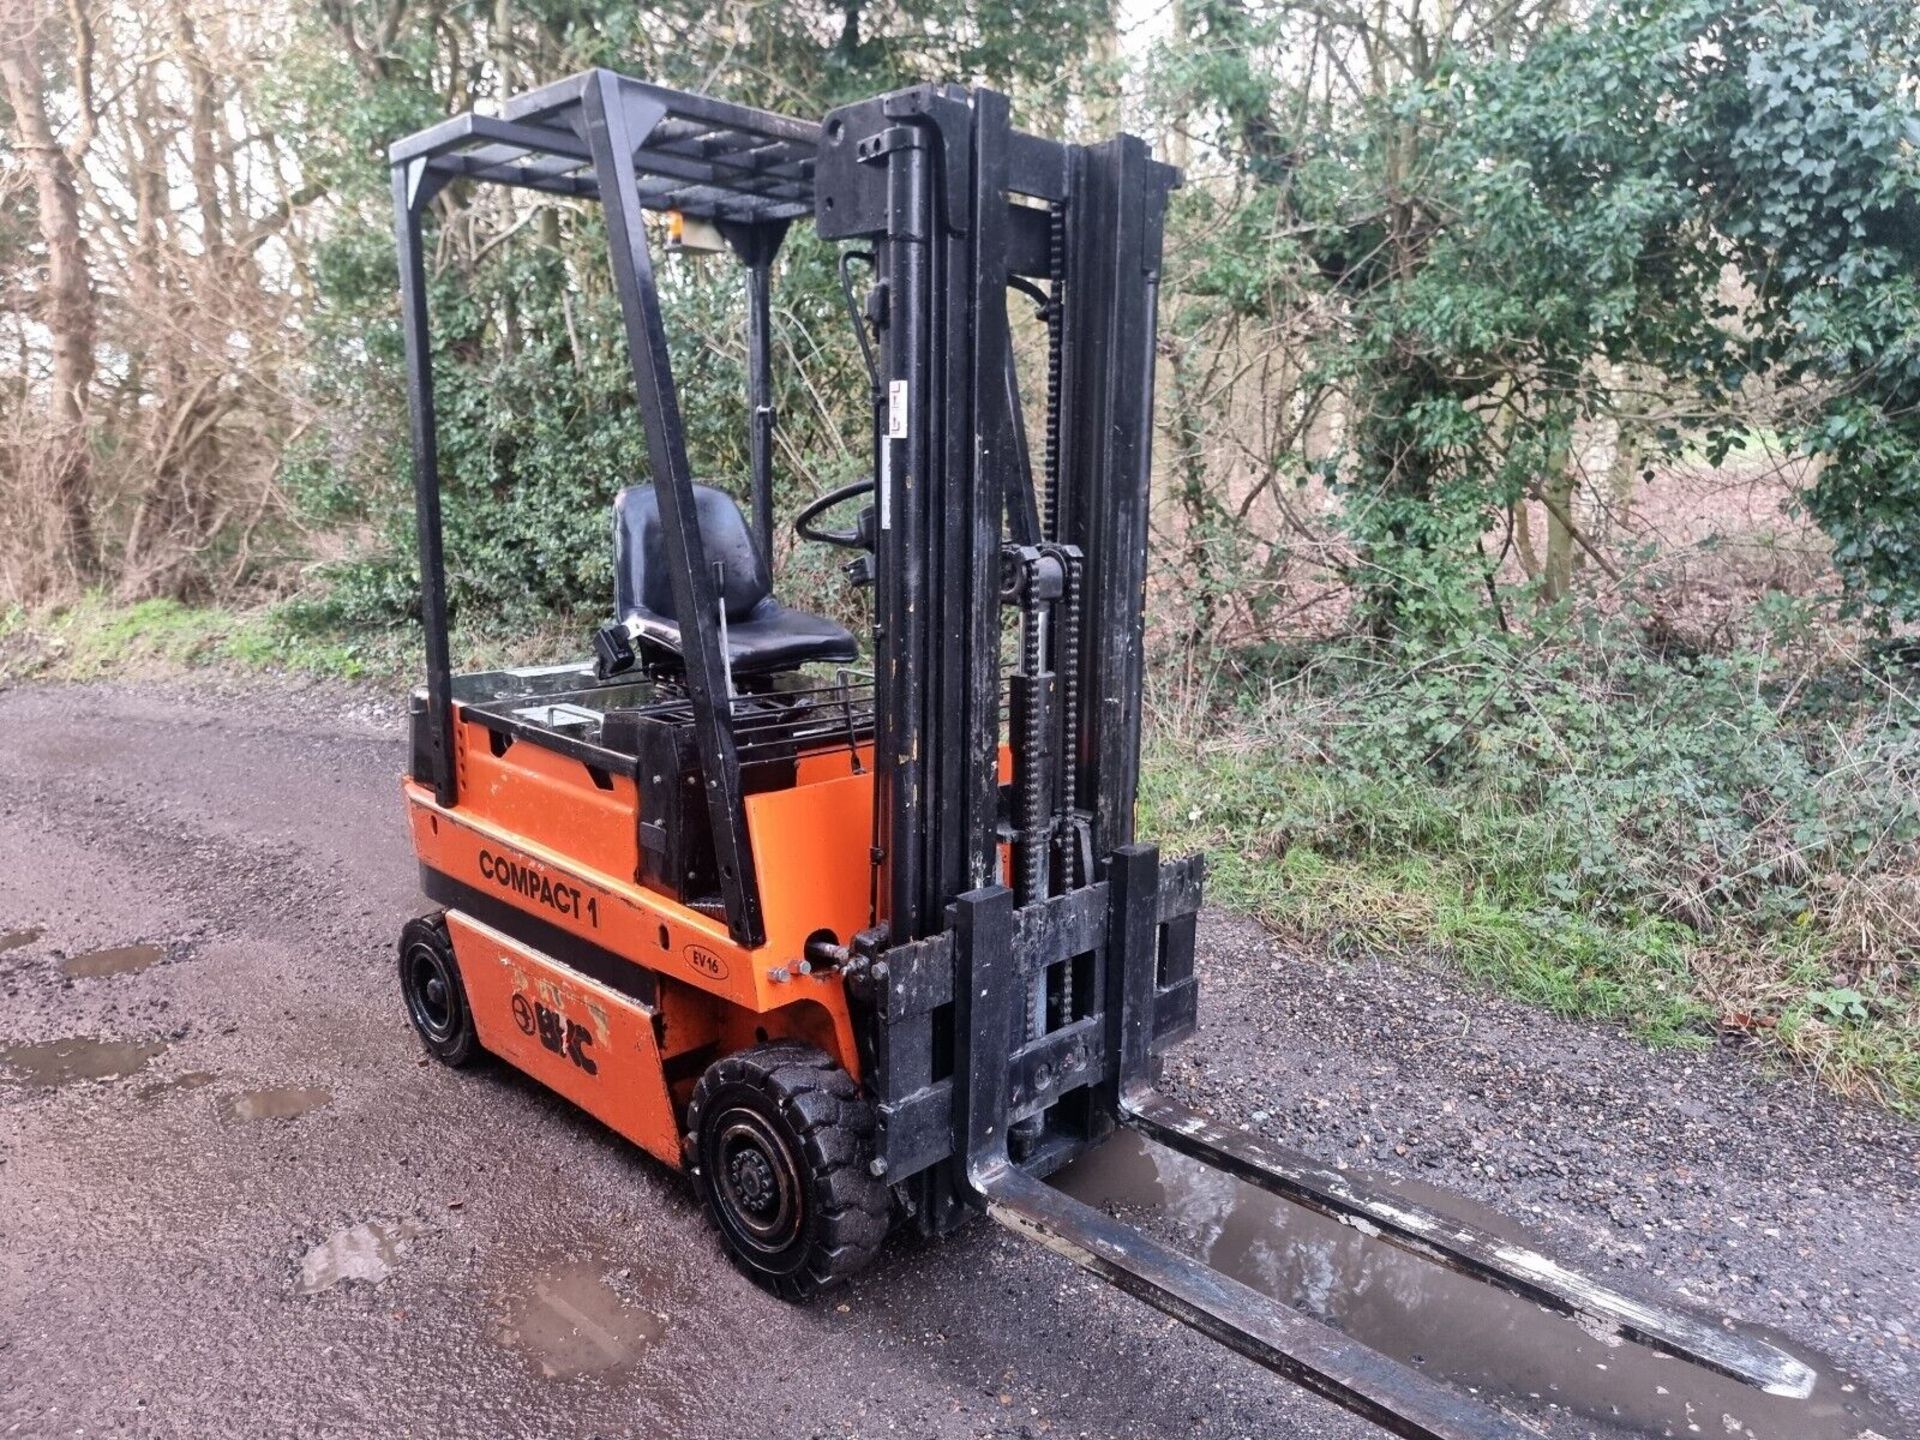 BKC ELECTRIC FORKLIFT 1.5 TON FORK LIFT CONTAINER SPEC - Image 6 of 6